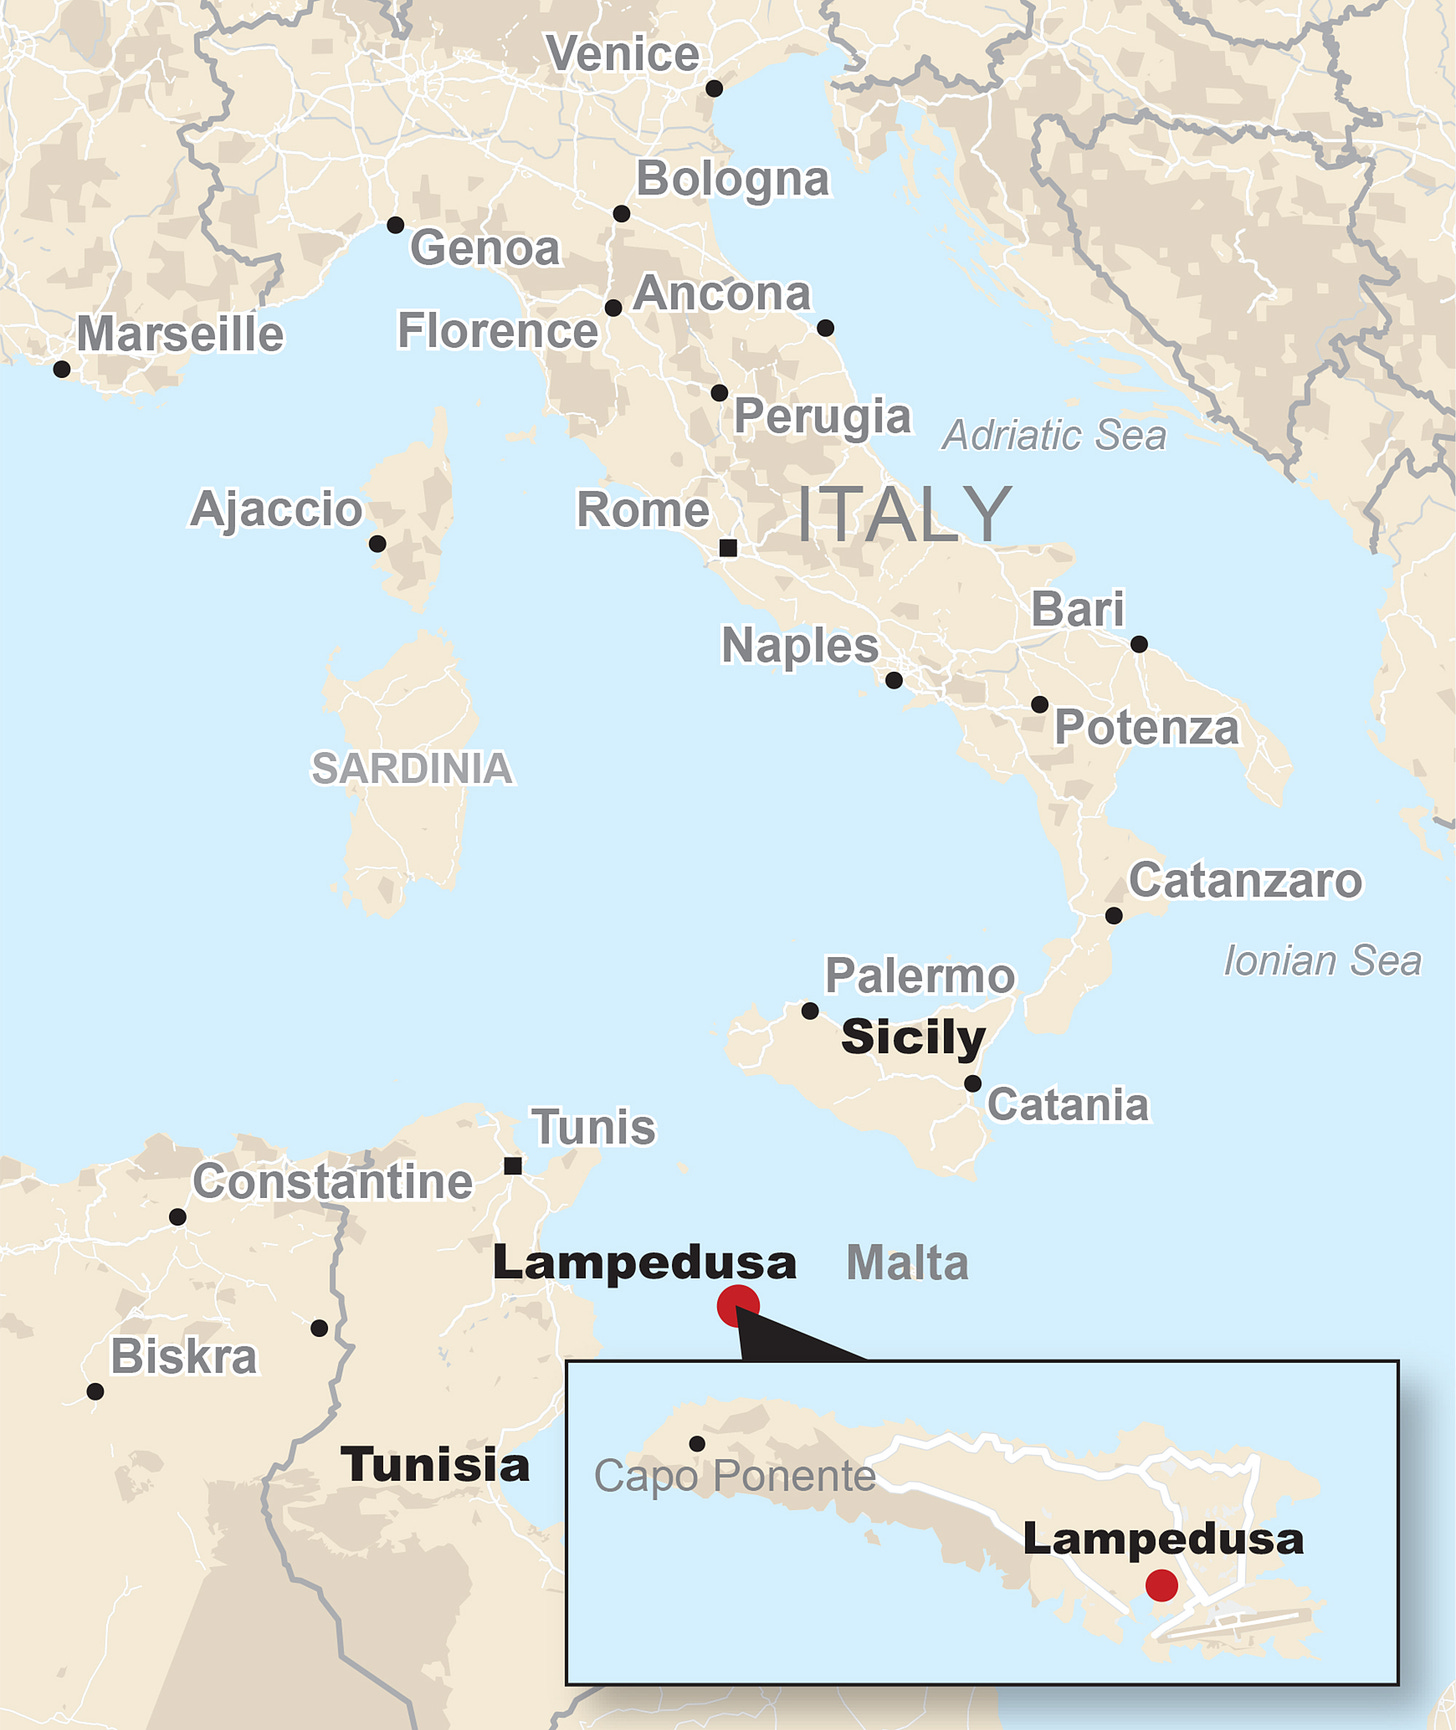 Lampedusa, Italy, shows America the future of lawless immigration